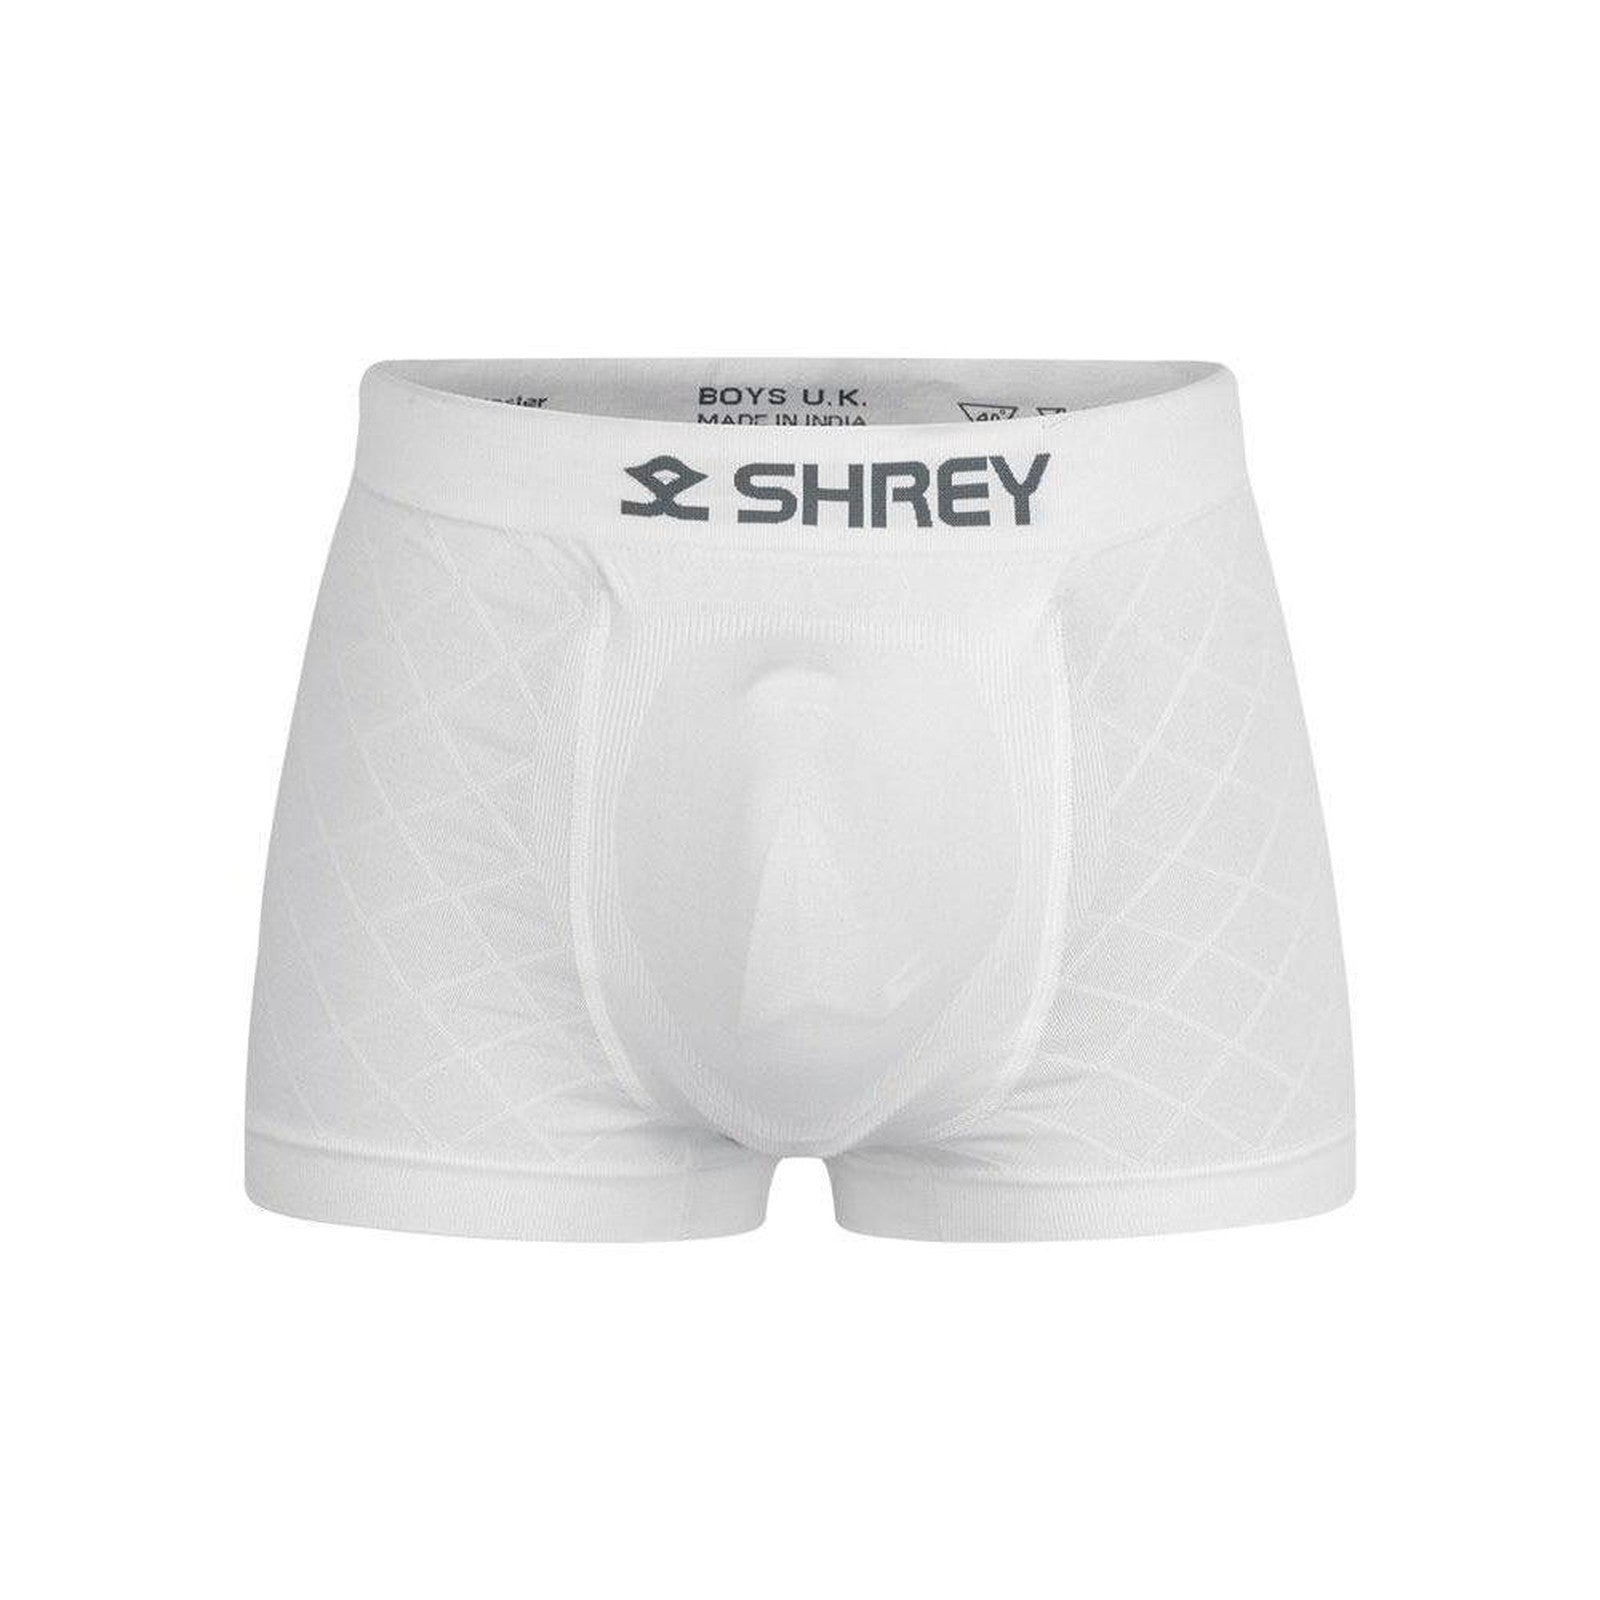 Shrey Performance Pro Groin Protector Trunk - Youth